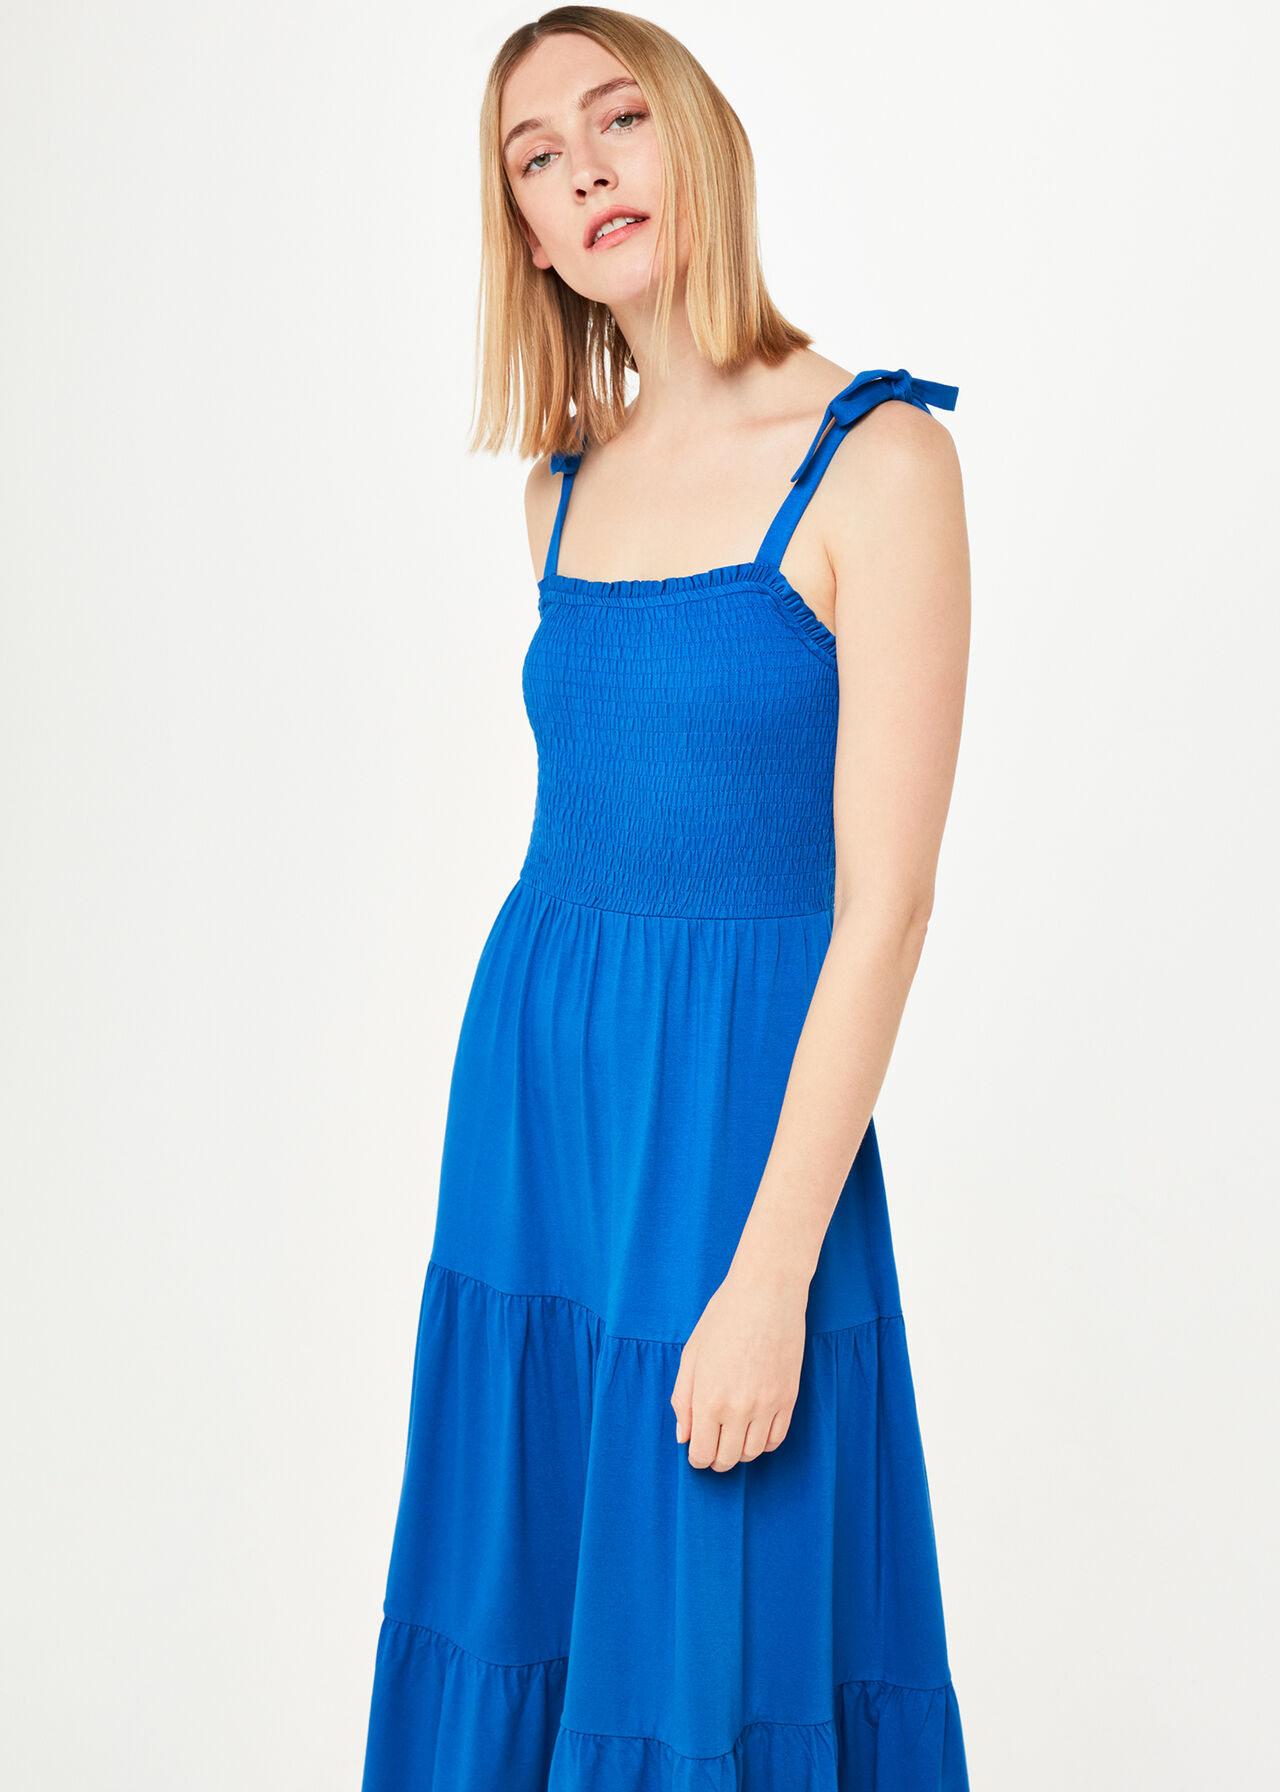 Blue Smocked Tiered Jersey Dress | WHISTLES